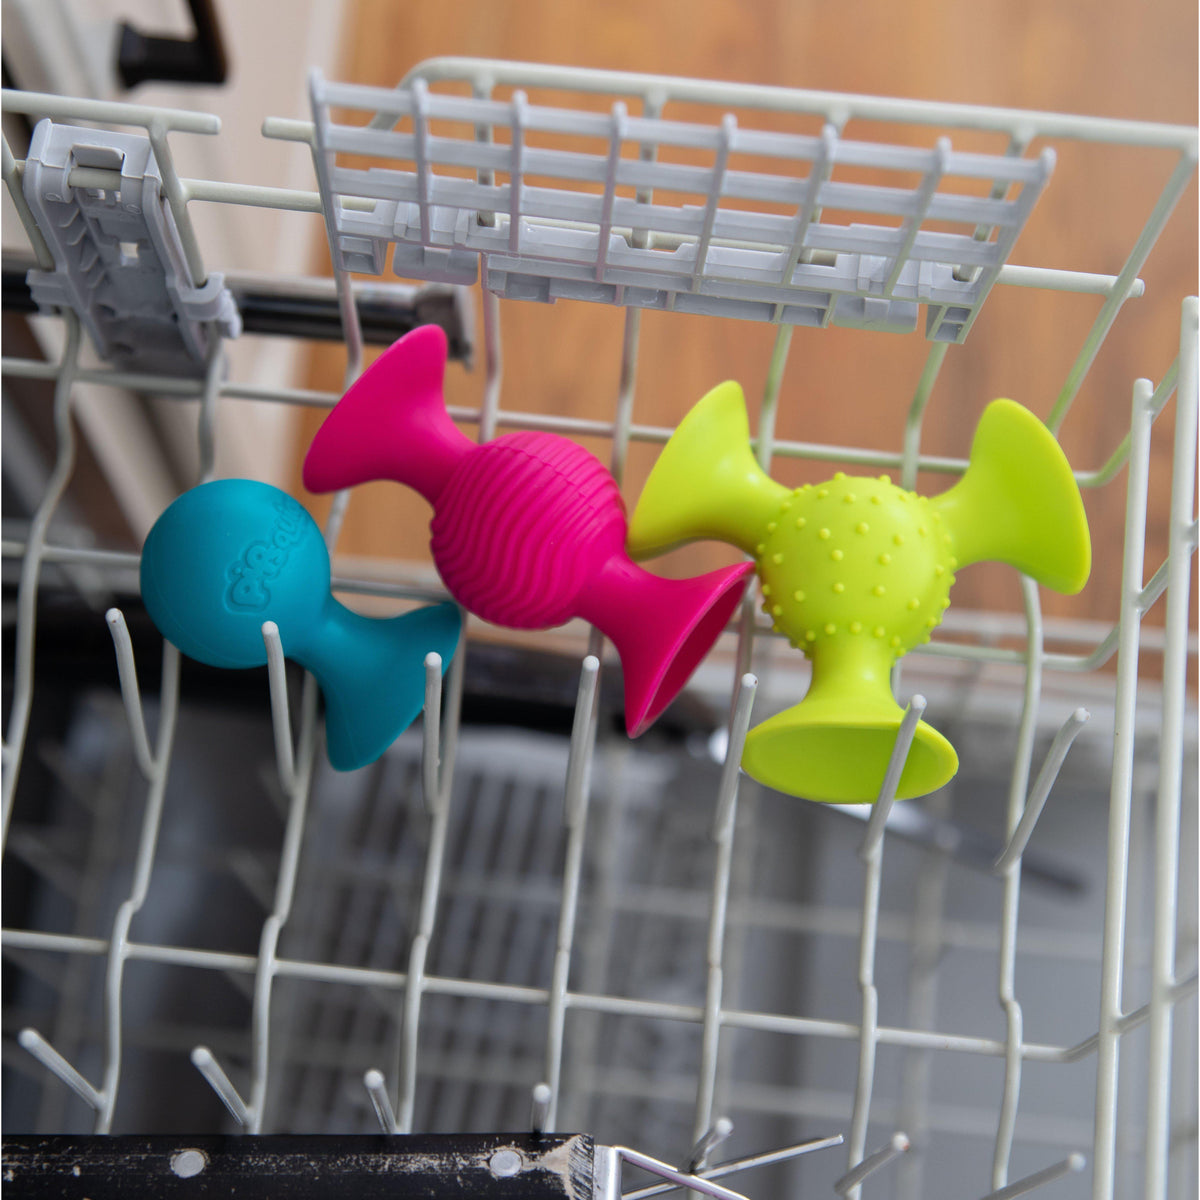 pipSquiges in a dishwasher